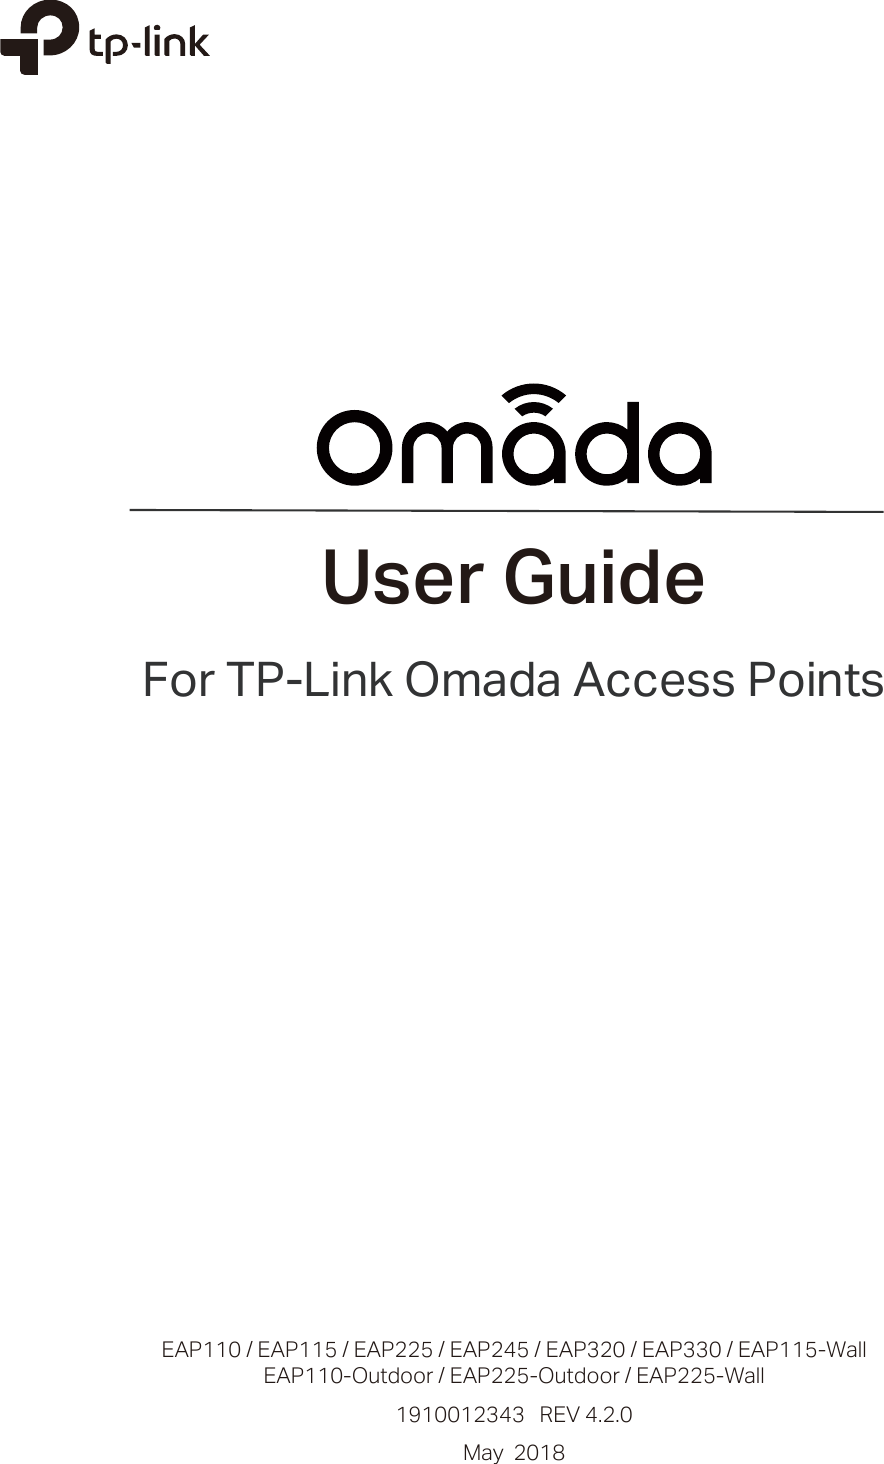 User GuideFor TP-Link Omada Access PointsEAP110 / EAP115 / EAP225 / EAP245 / EAP320 / EAP330 / EAP115-WallEAP110-Outdoor / EAP225-Outdoor / EAP225-Wall1910012343   REV 4.2.0May  2018 